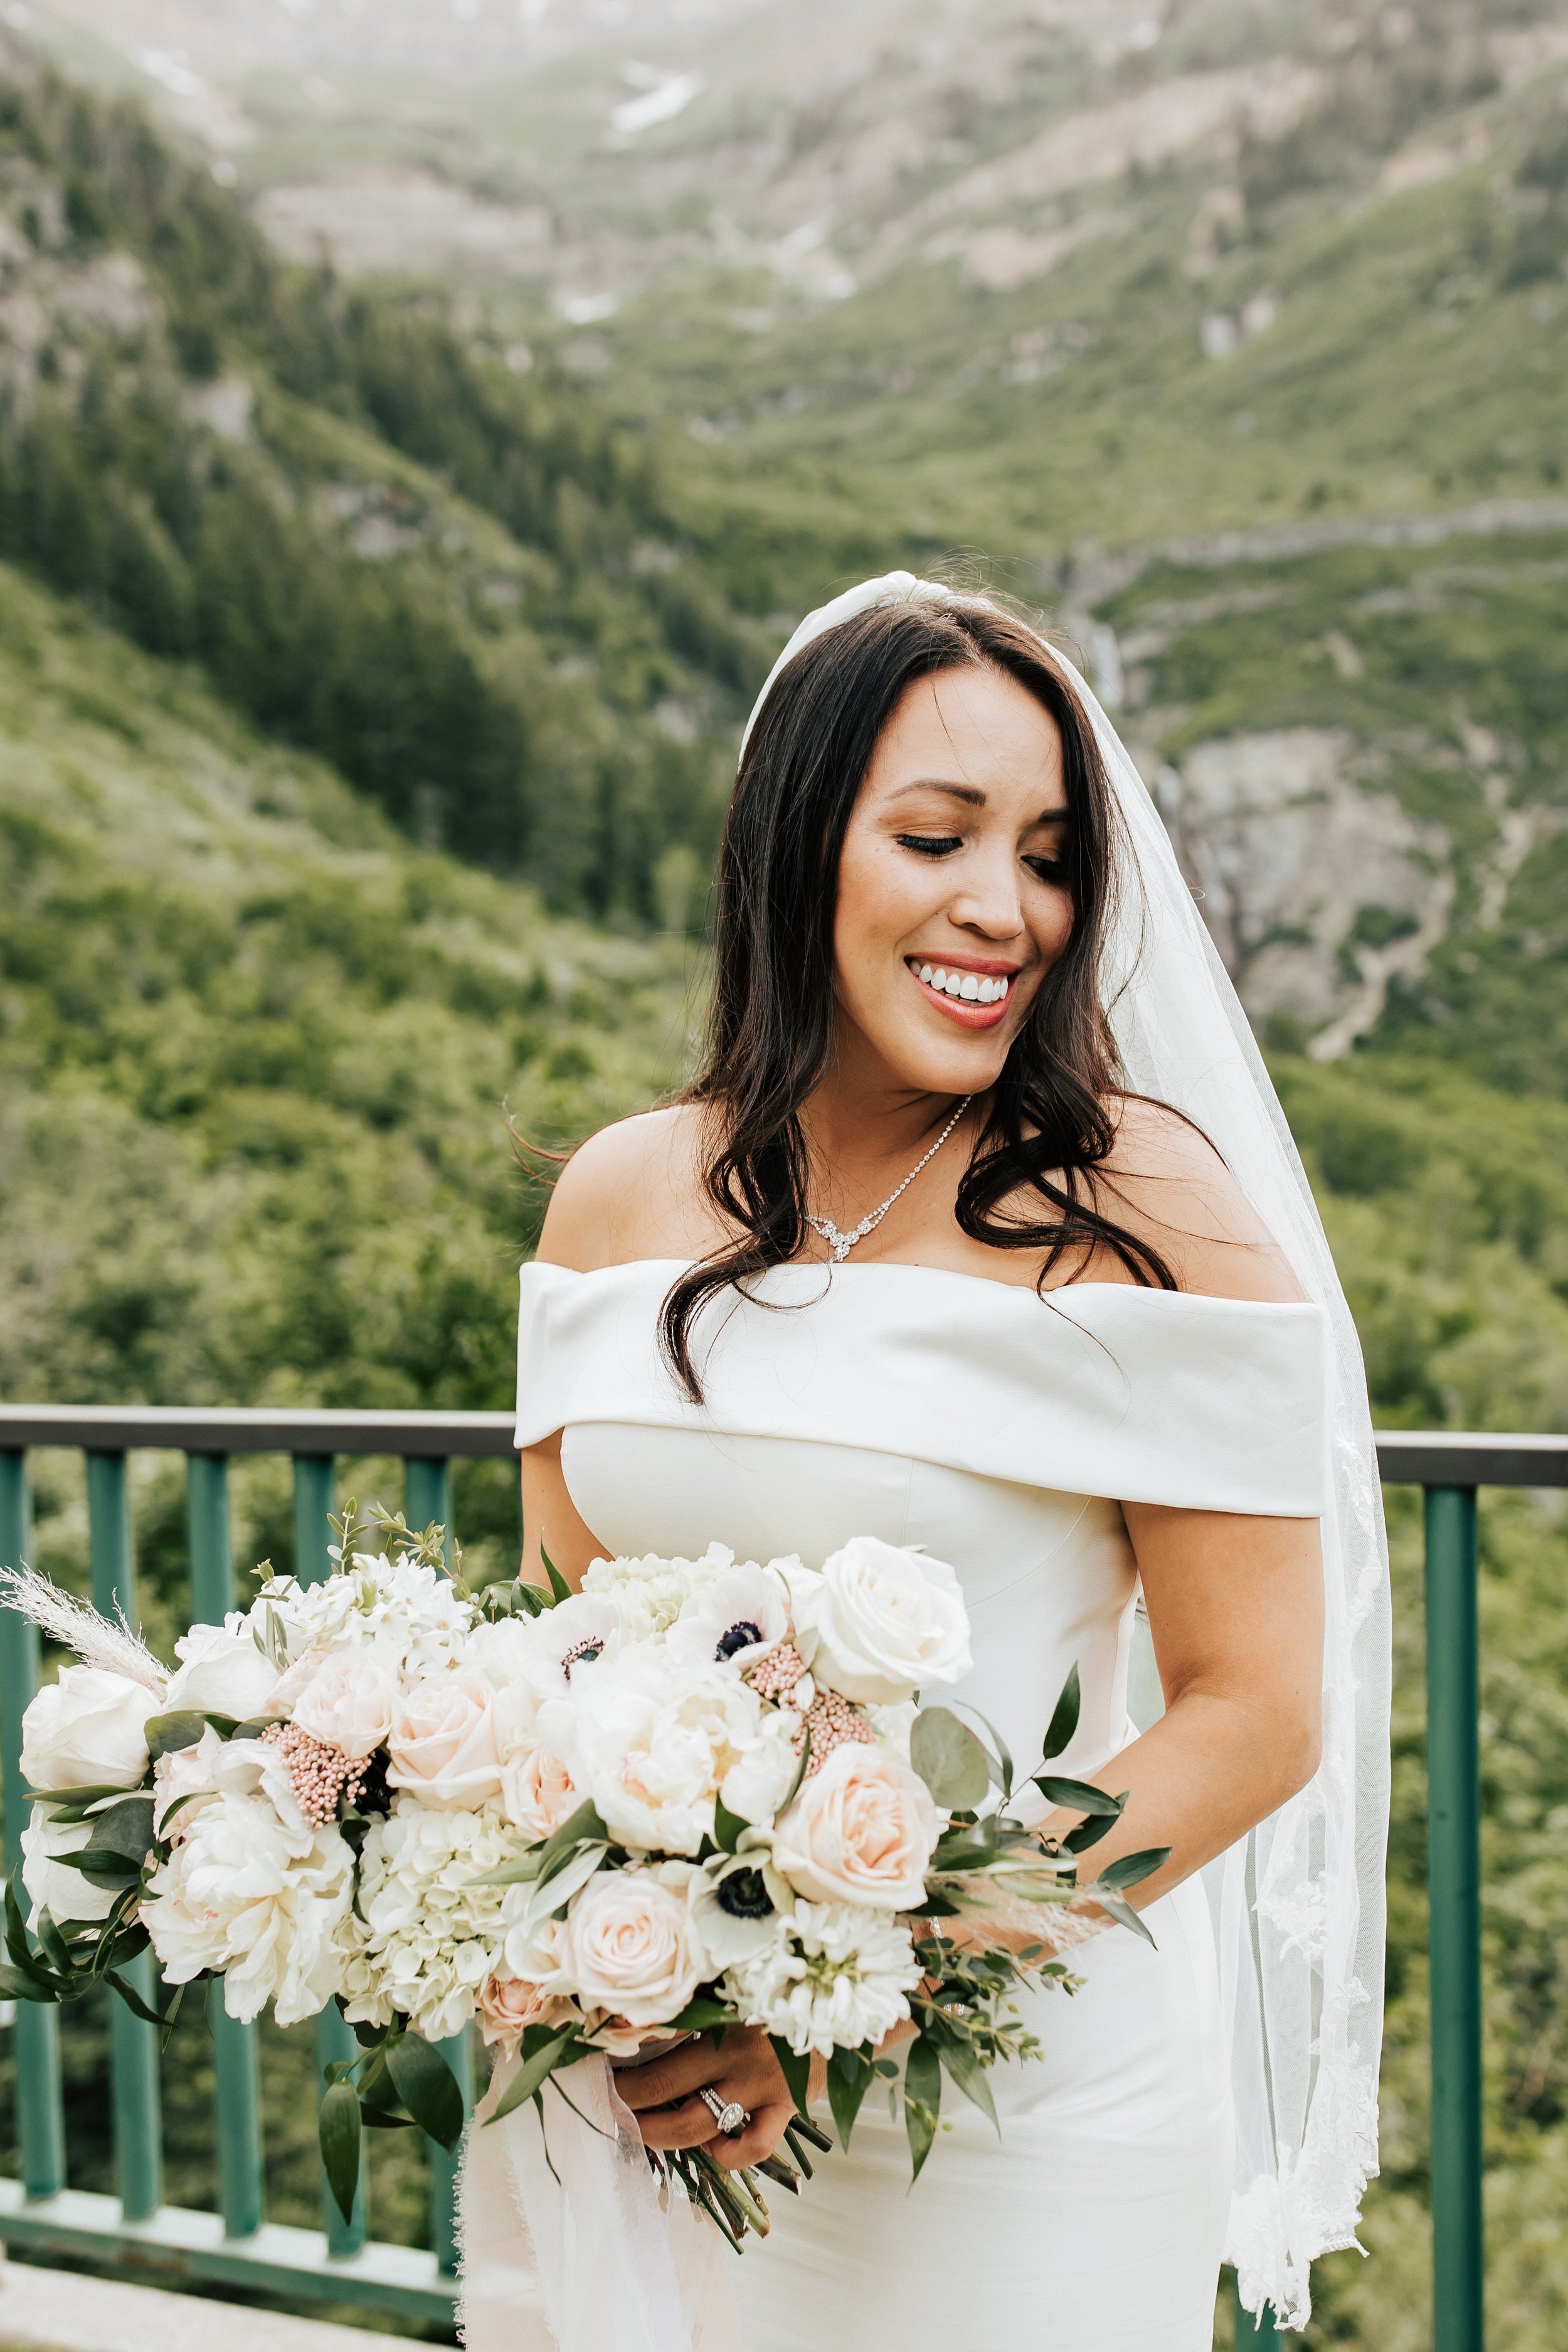  Bride smiles while holding her large pink and white bouquet of flowers after wedding ceremony. #weddingphotos #weddingphotographer #utahwedding 